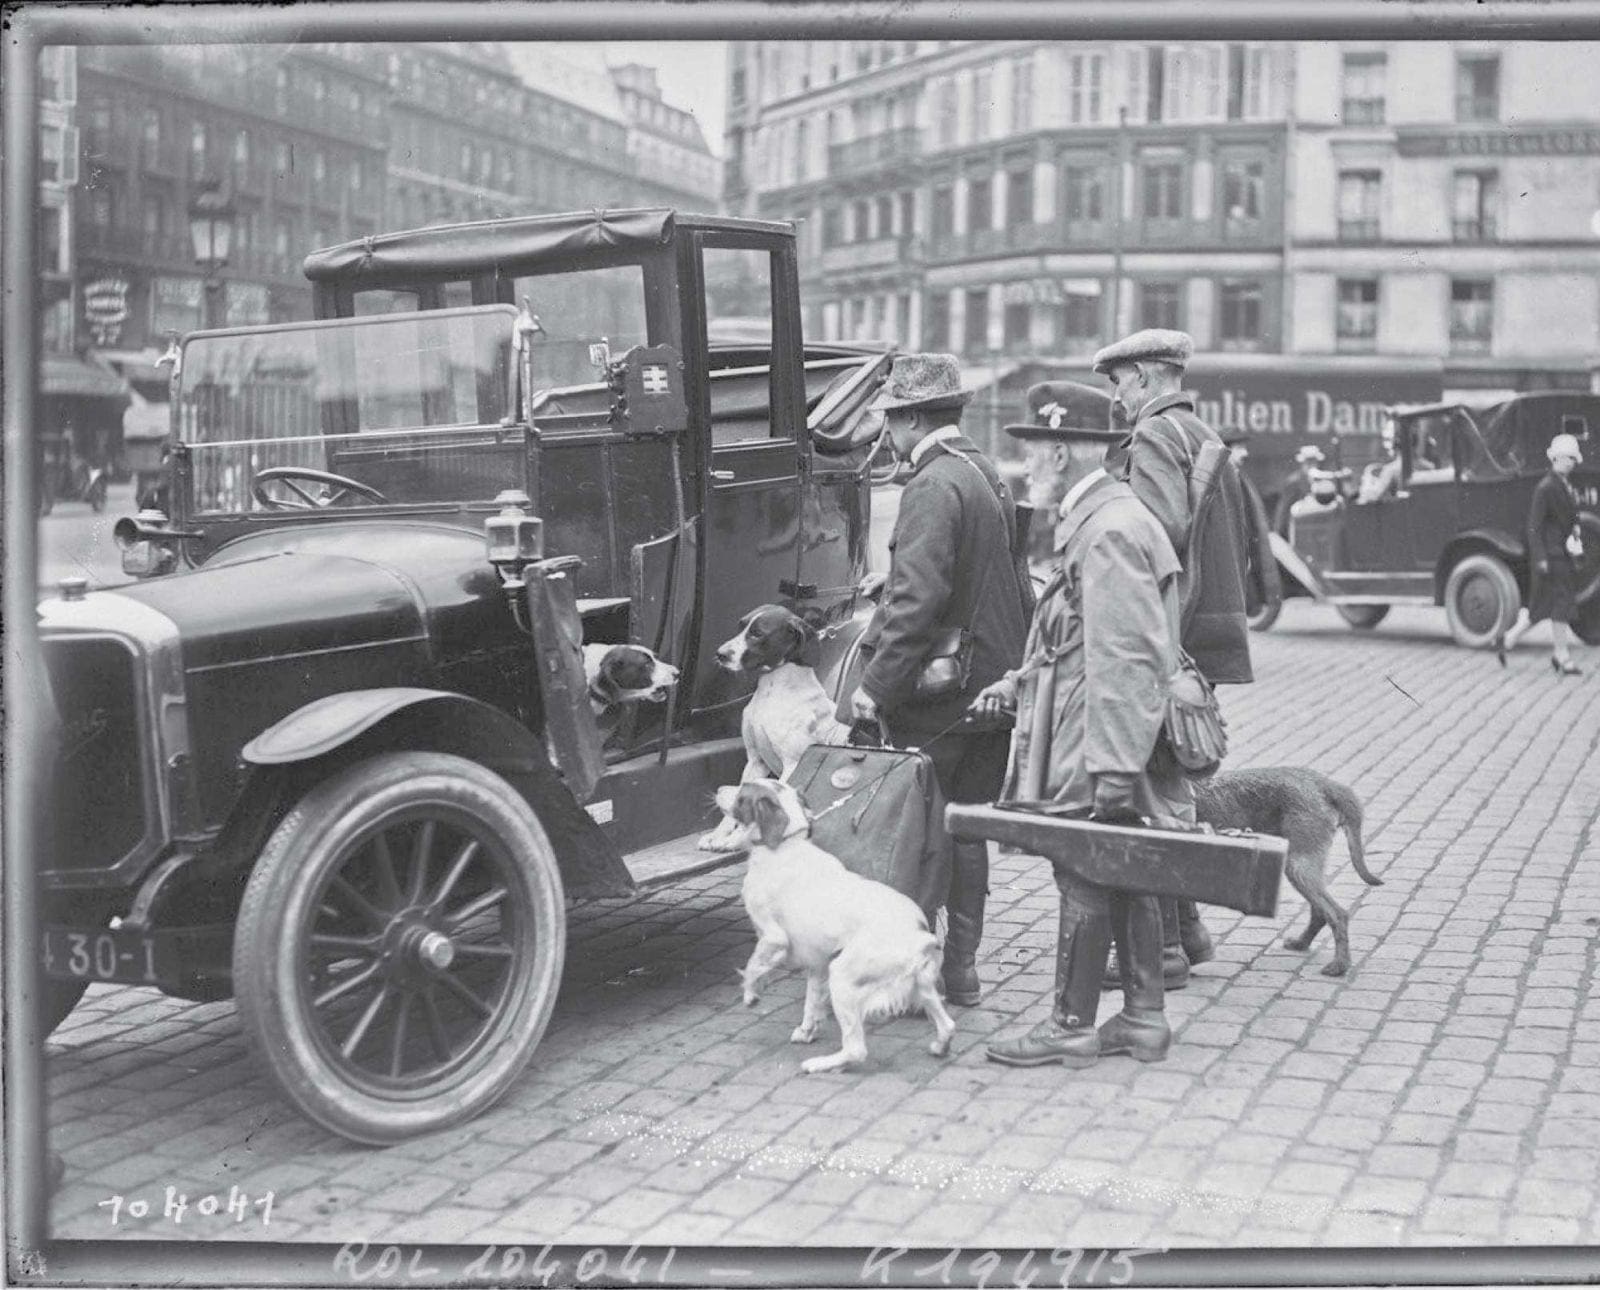 French hunters enter a taxi with hunting dogs and guns in 1925